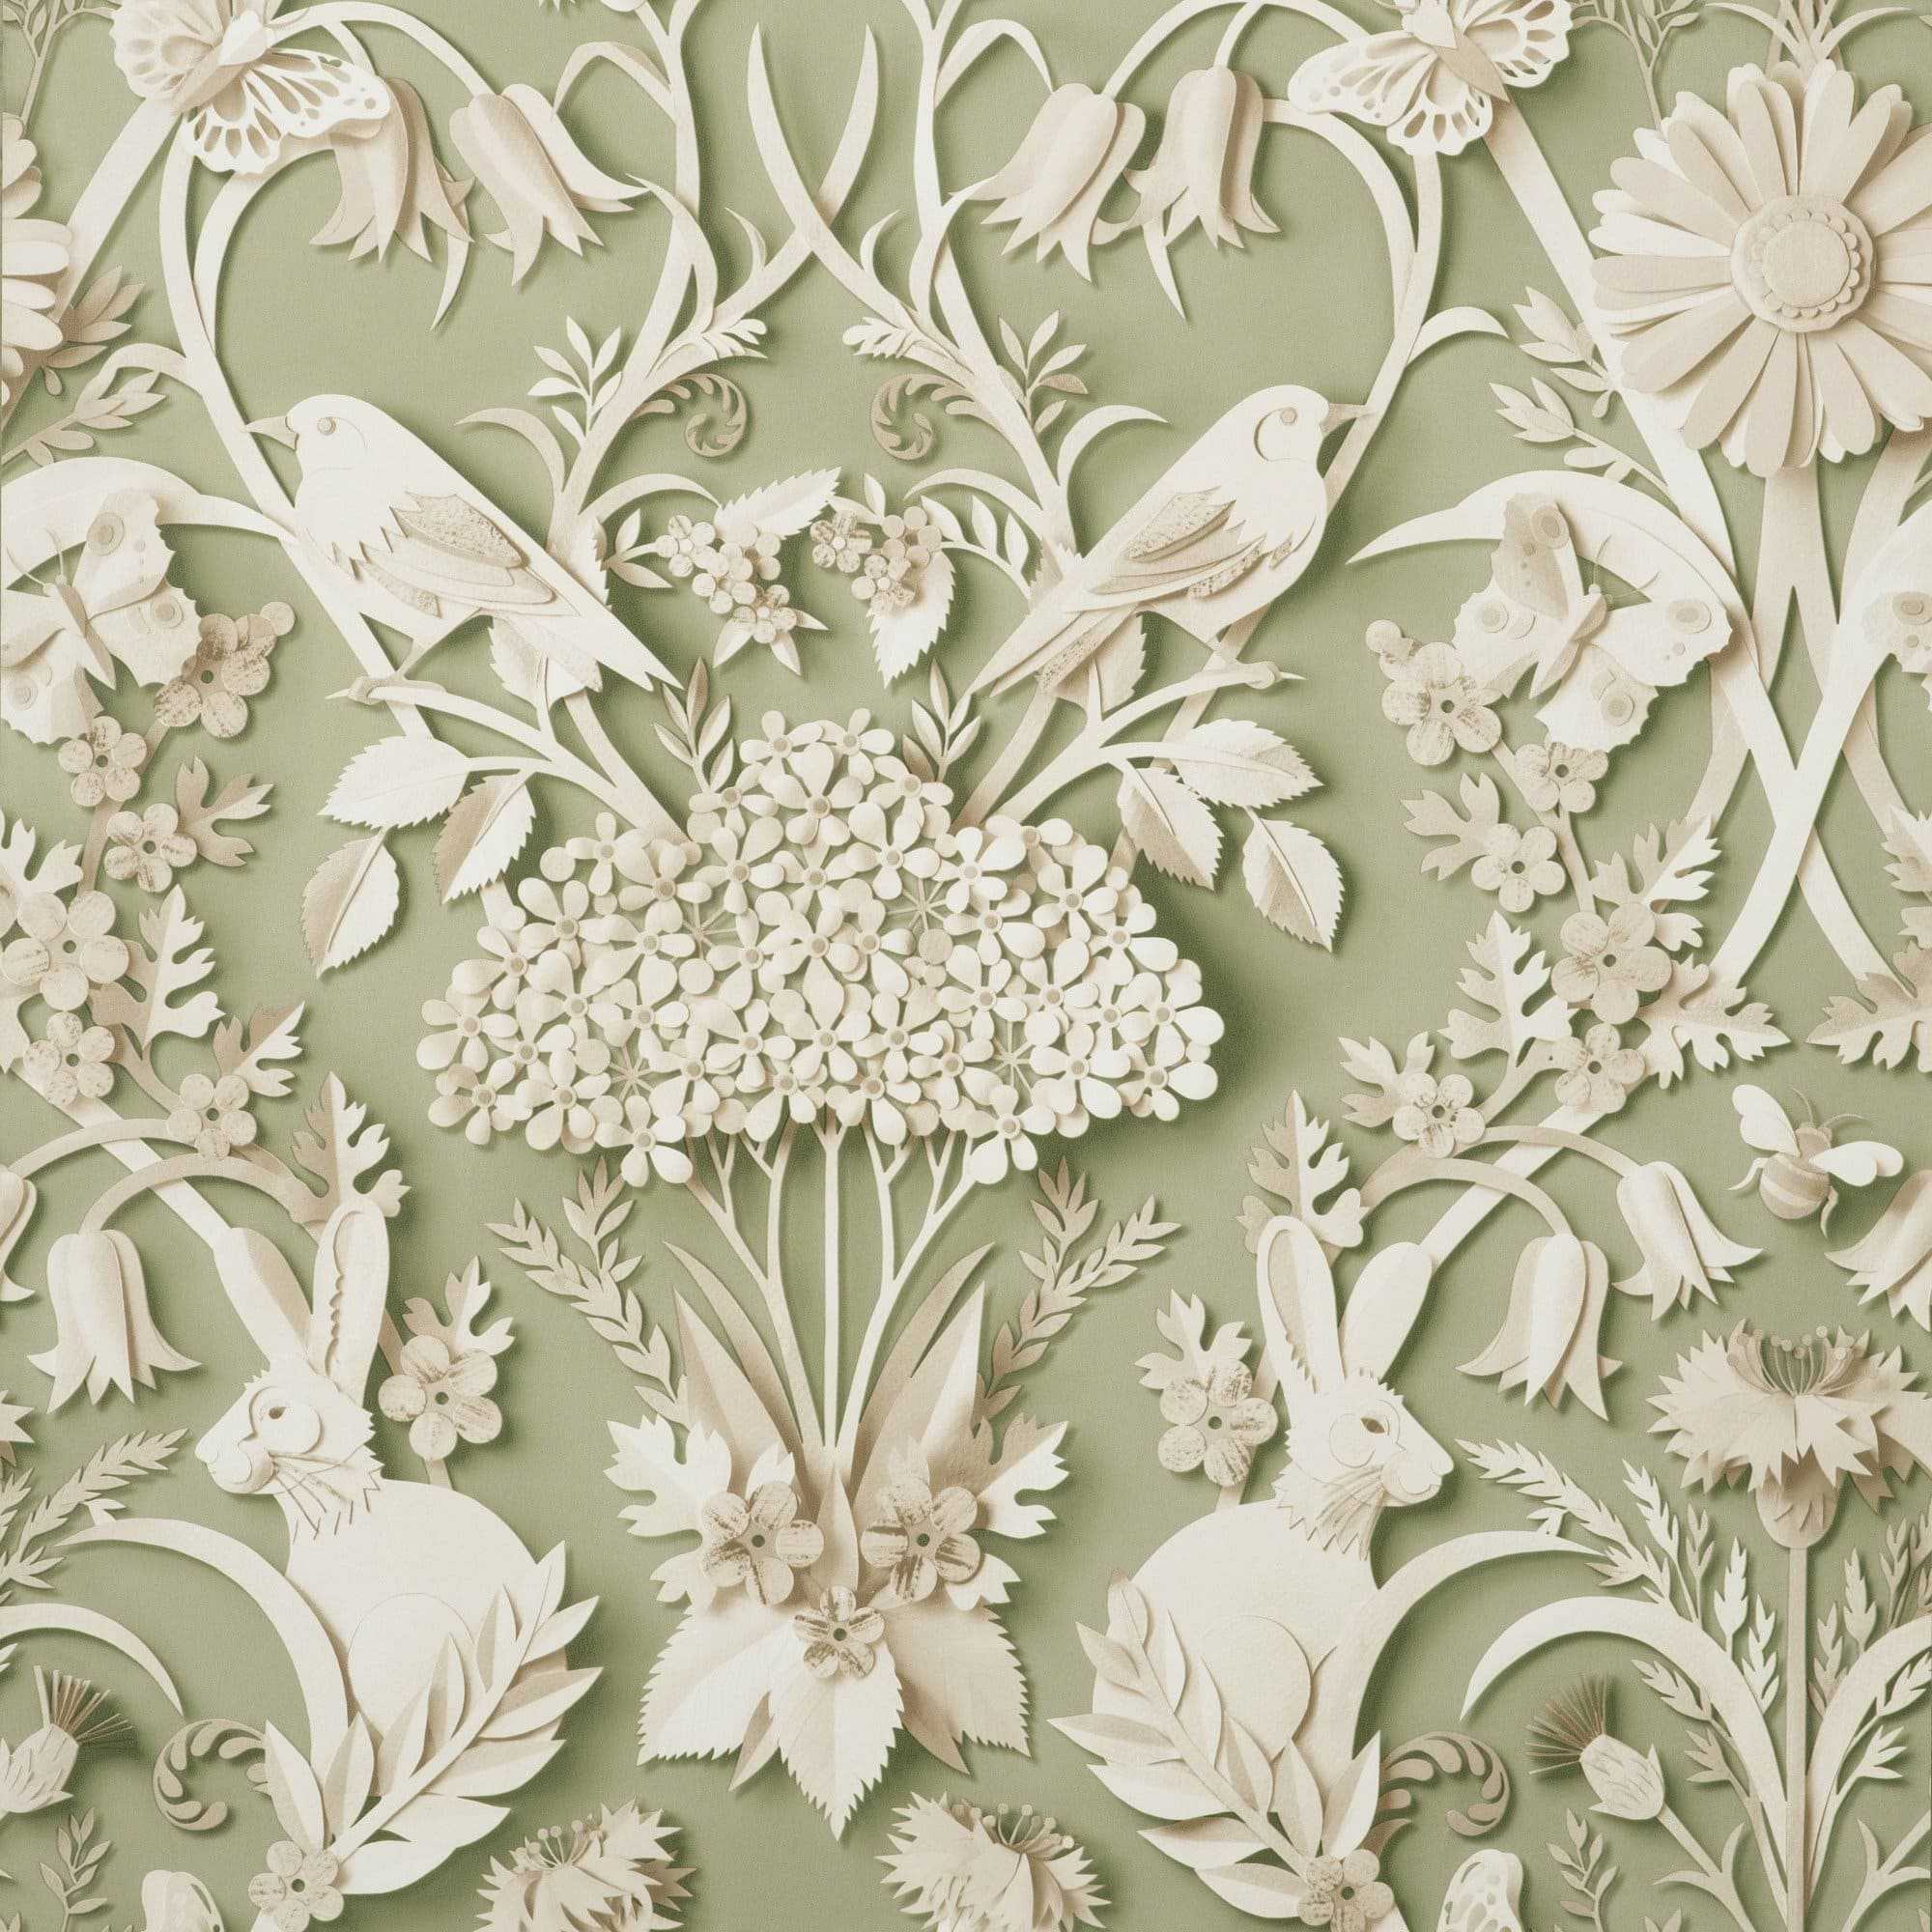 A wallpaper with flowers and animals on it - Sage green